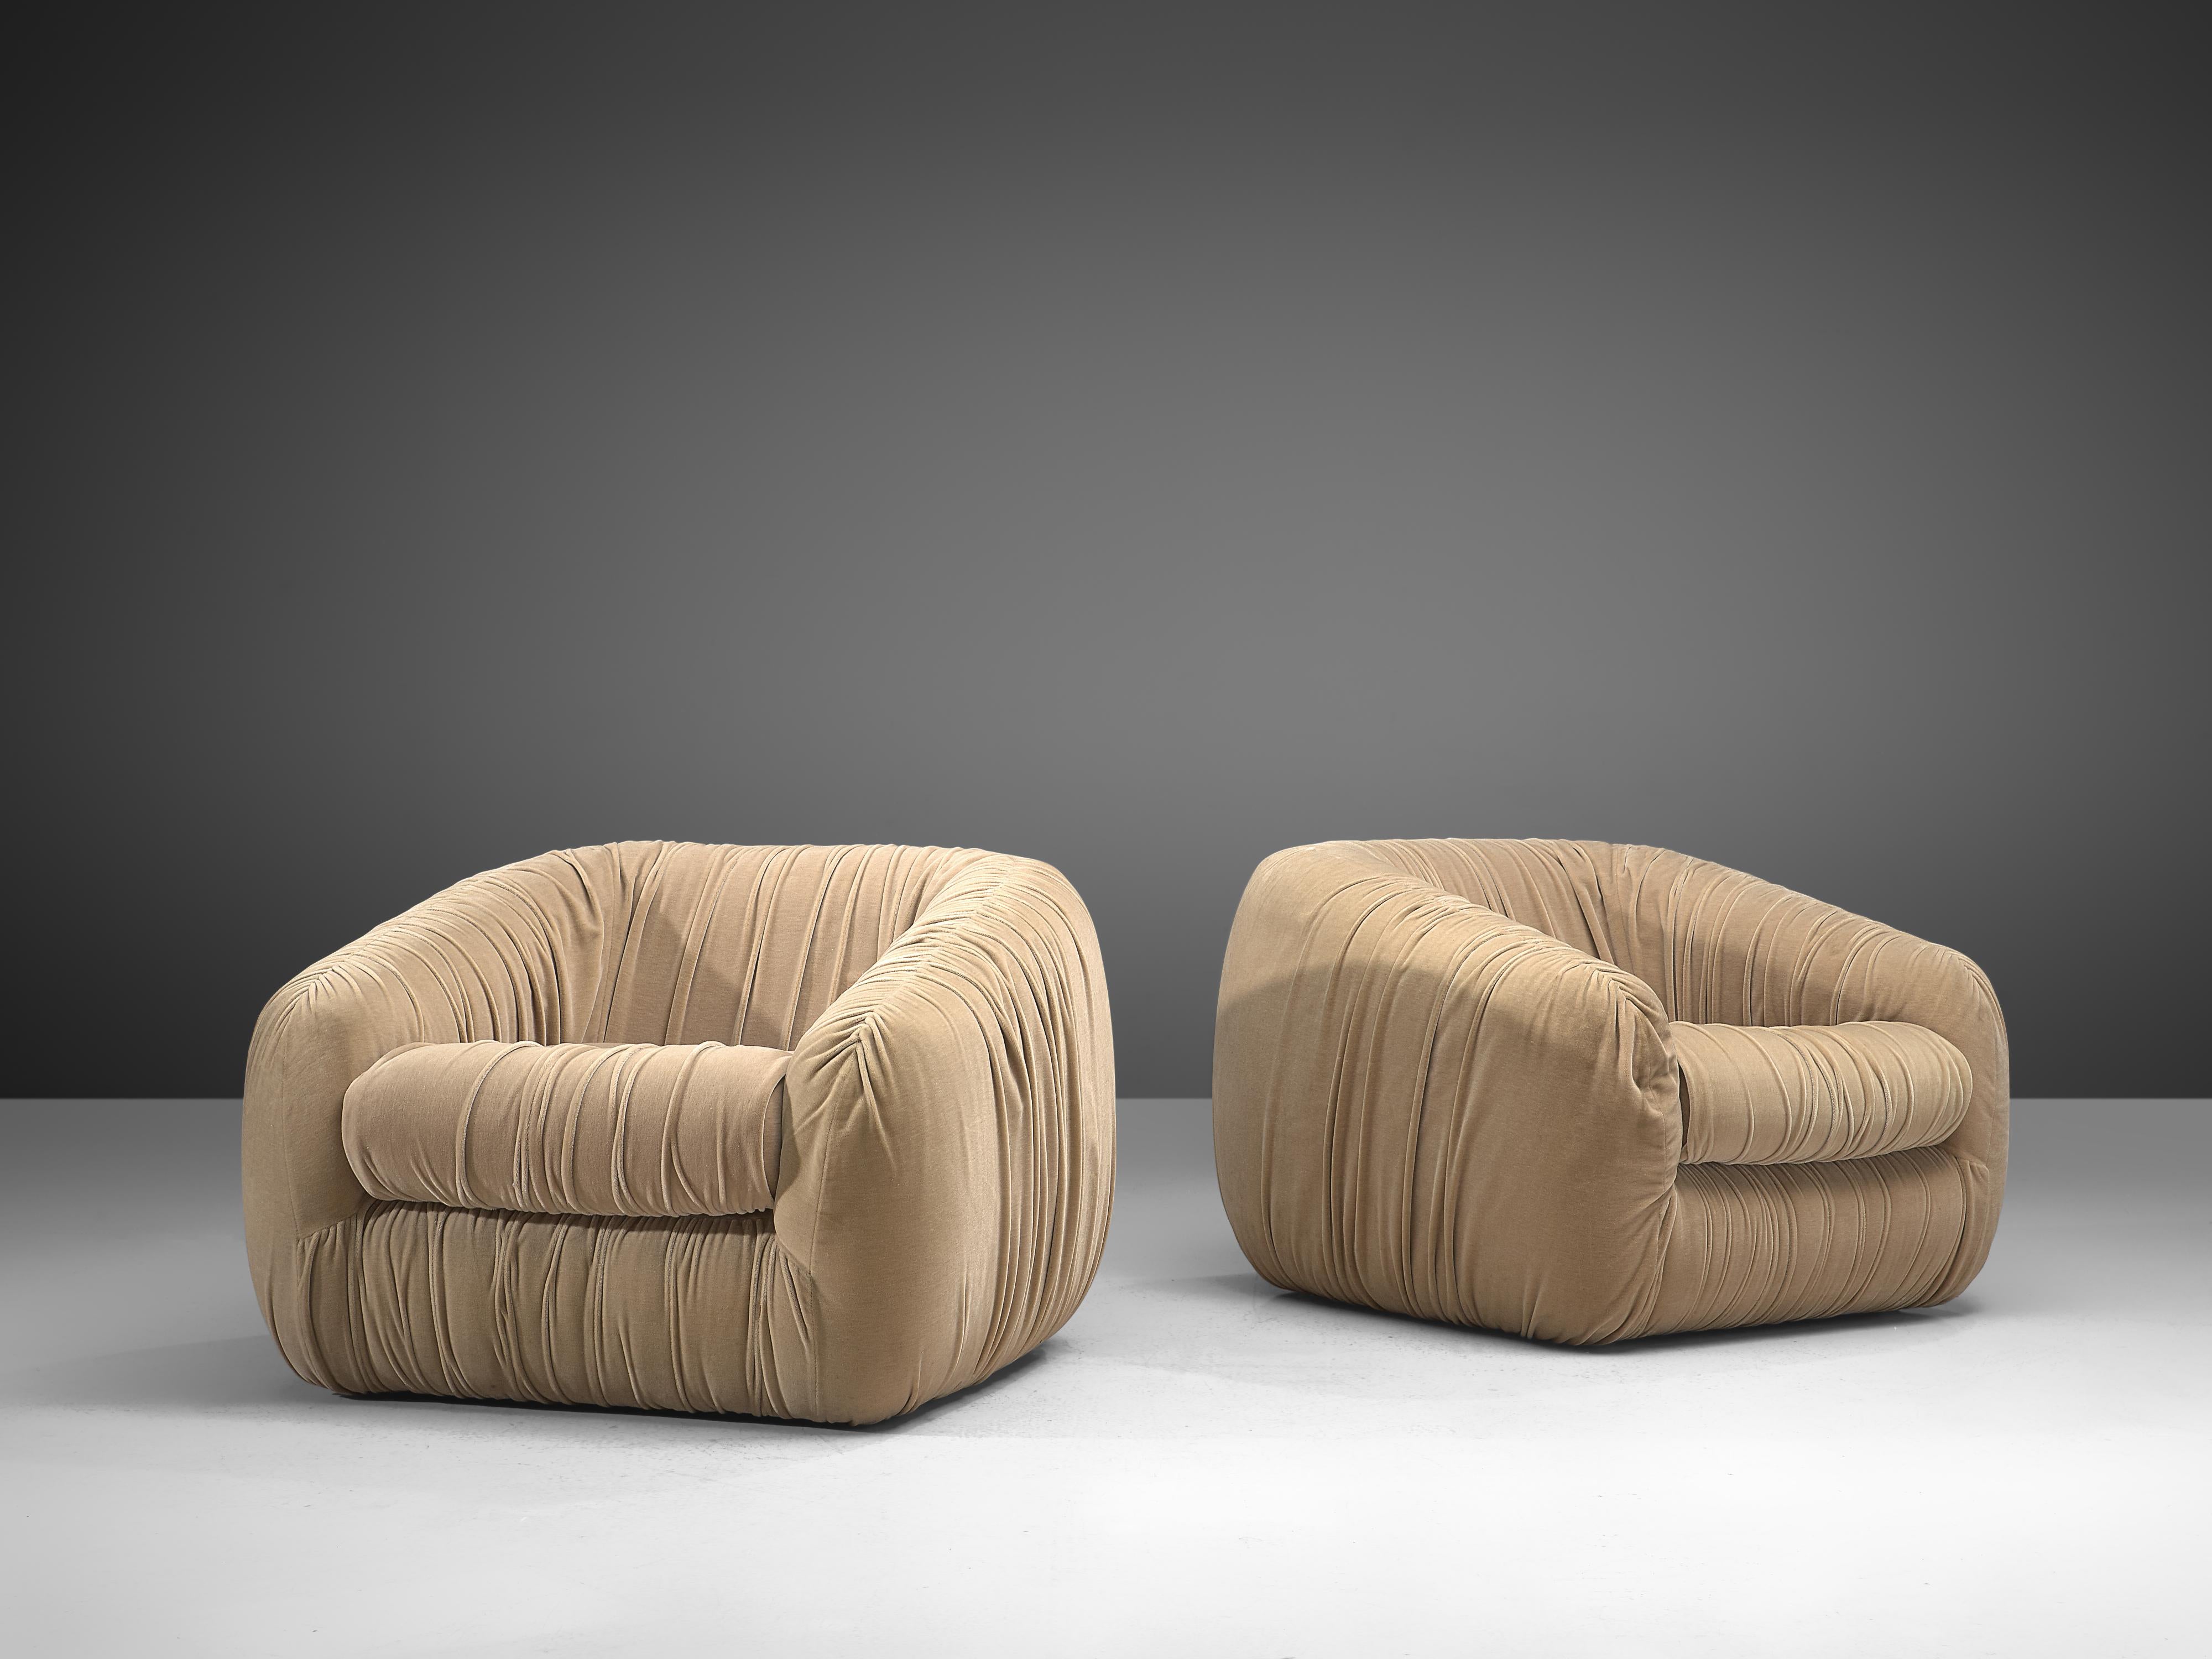 Airborne, pair of lounge chairs, beige velvet, France, 1970s

Stunning set of grand and bulky lounge chairs by Airborne. The chairs have an exaggerated plump appearance. Yet the thoughtful upholstery with arranged in elegant folds. The set is a